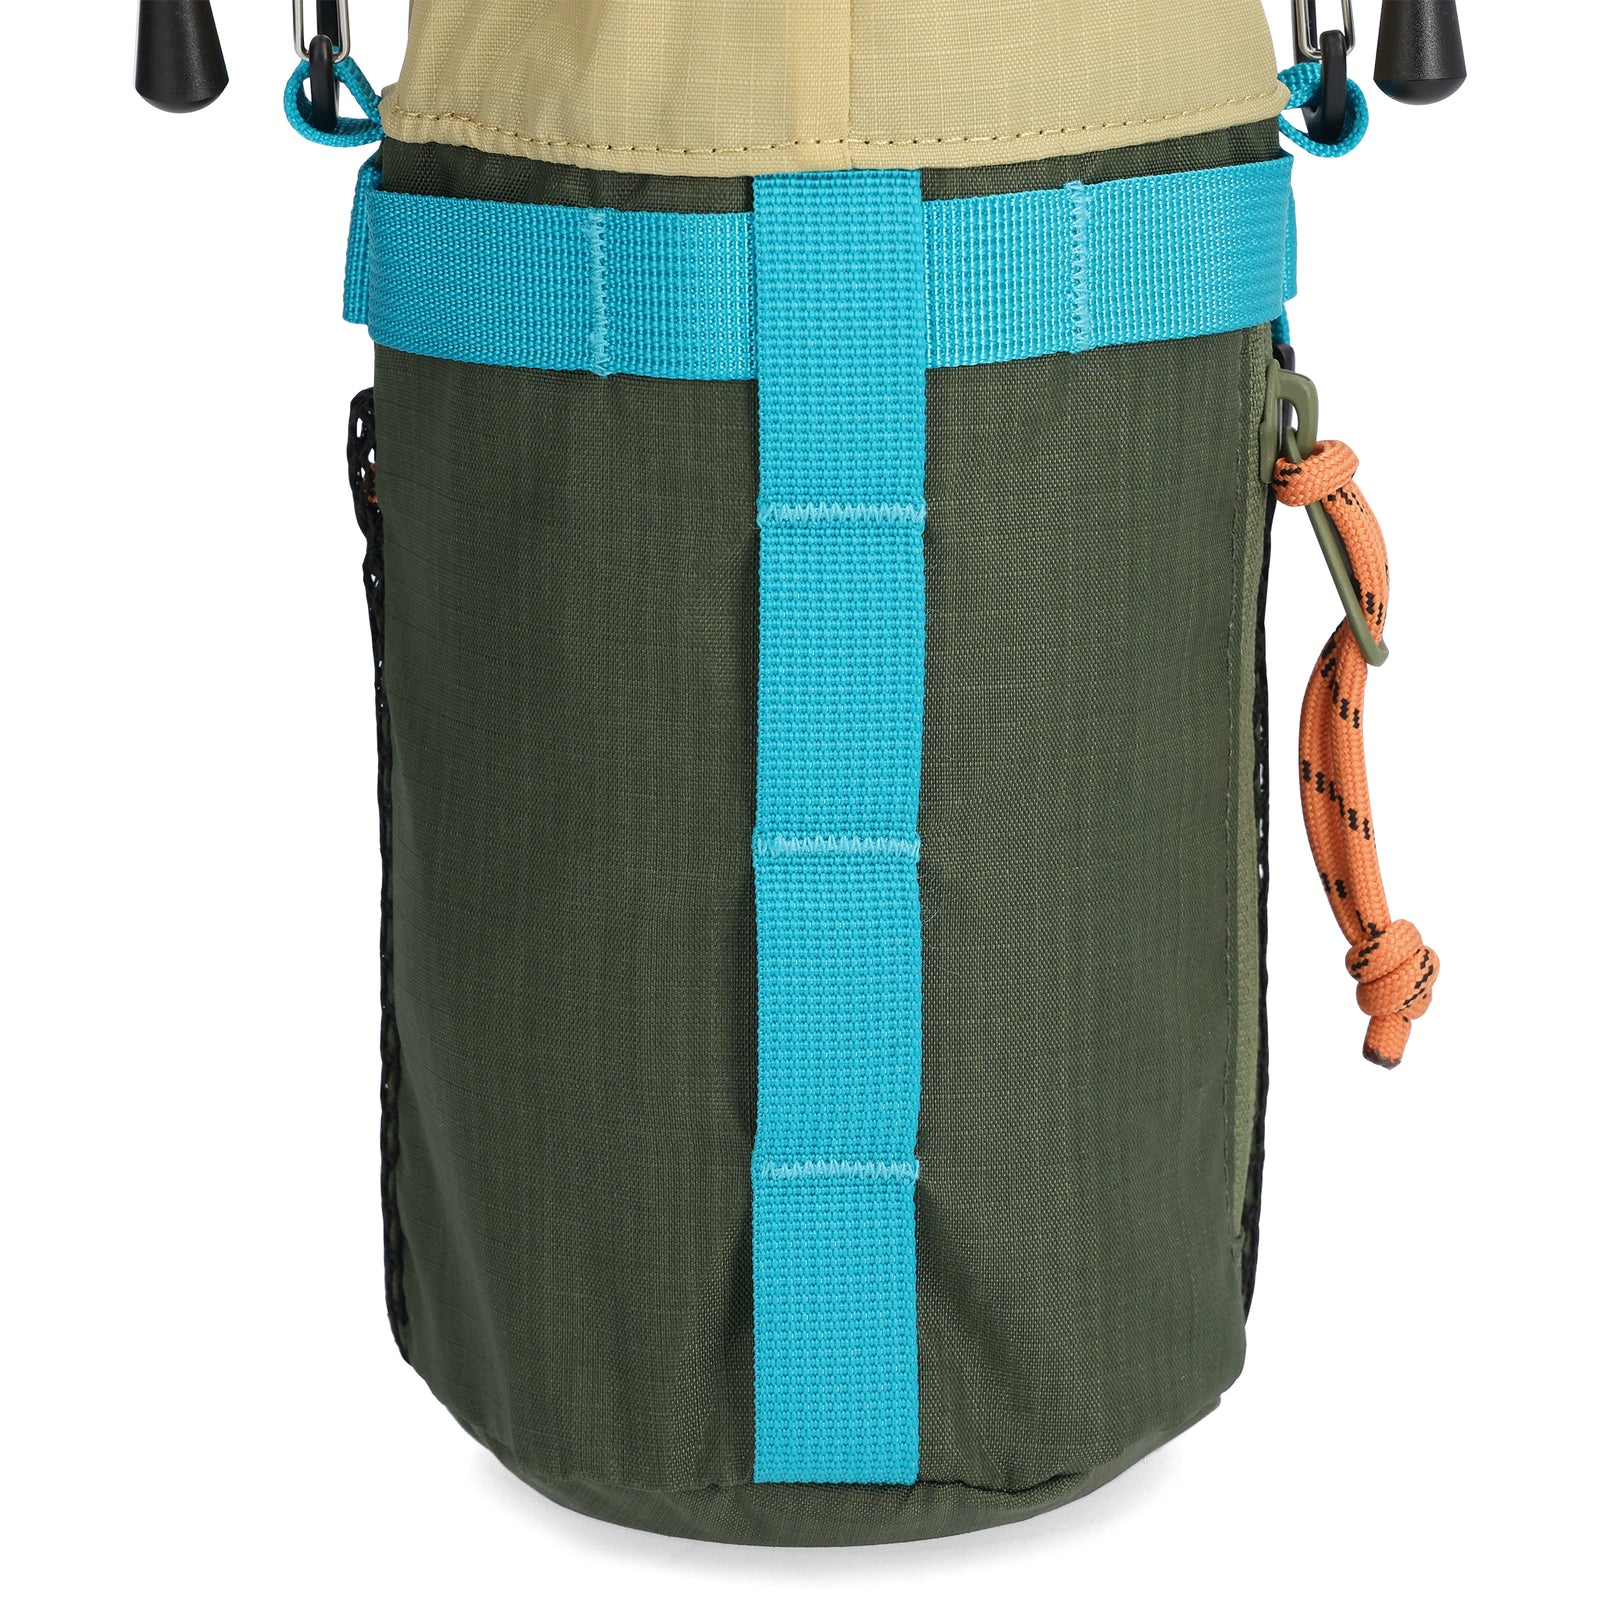 General detail shot of Topo Designs Mountain Hydro Sling in "Olive"